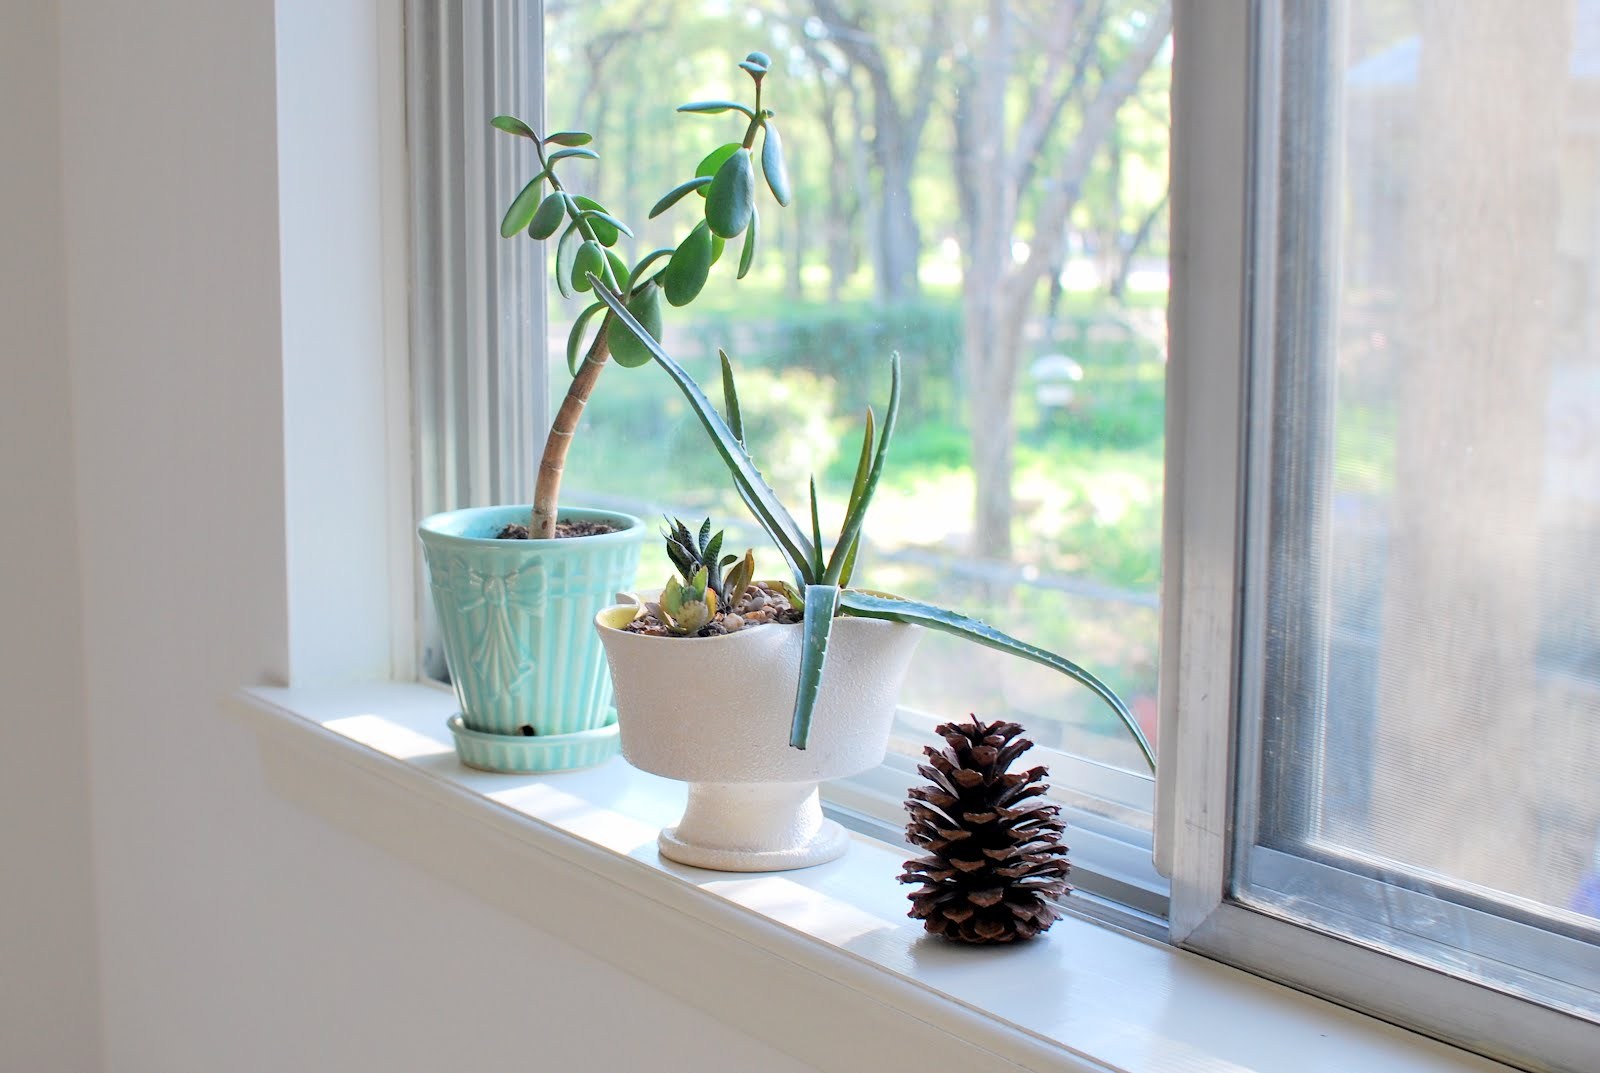 How to attractively arrange window sills